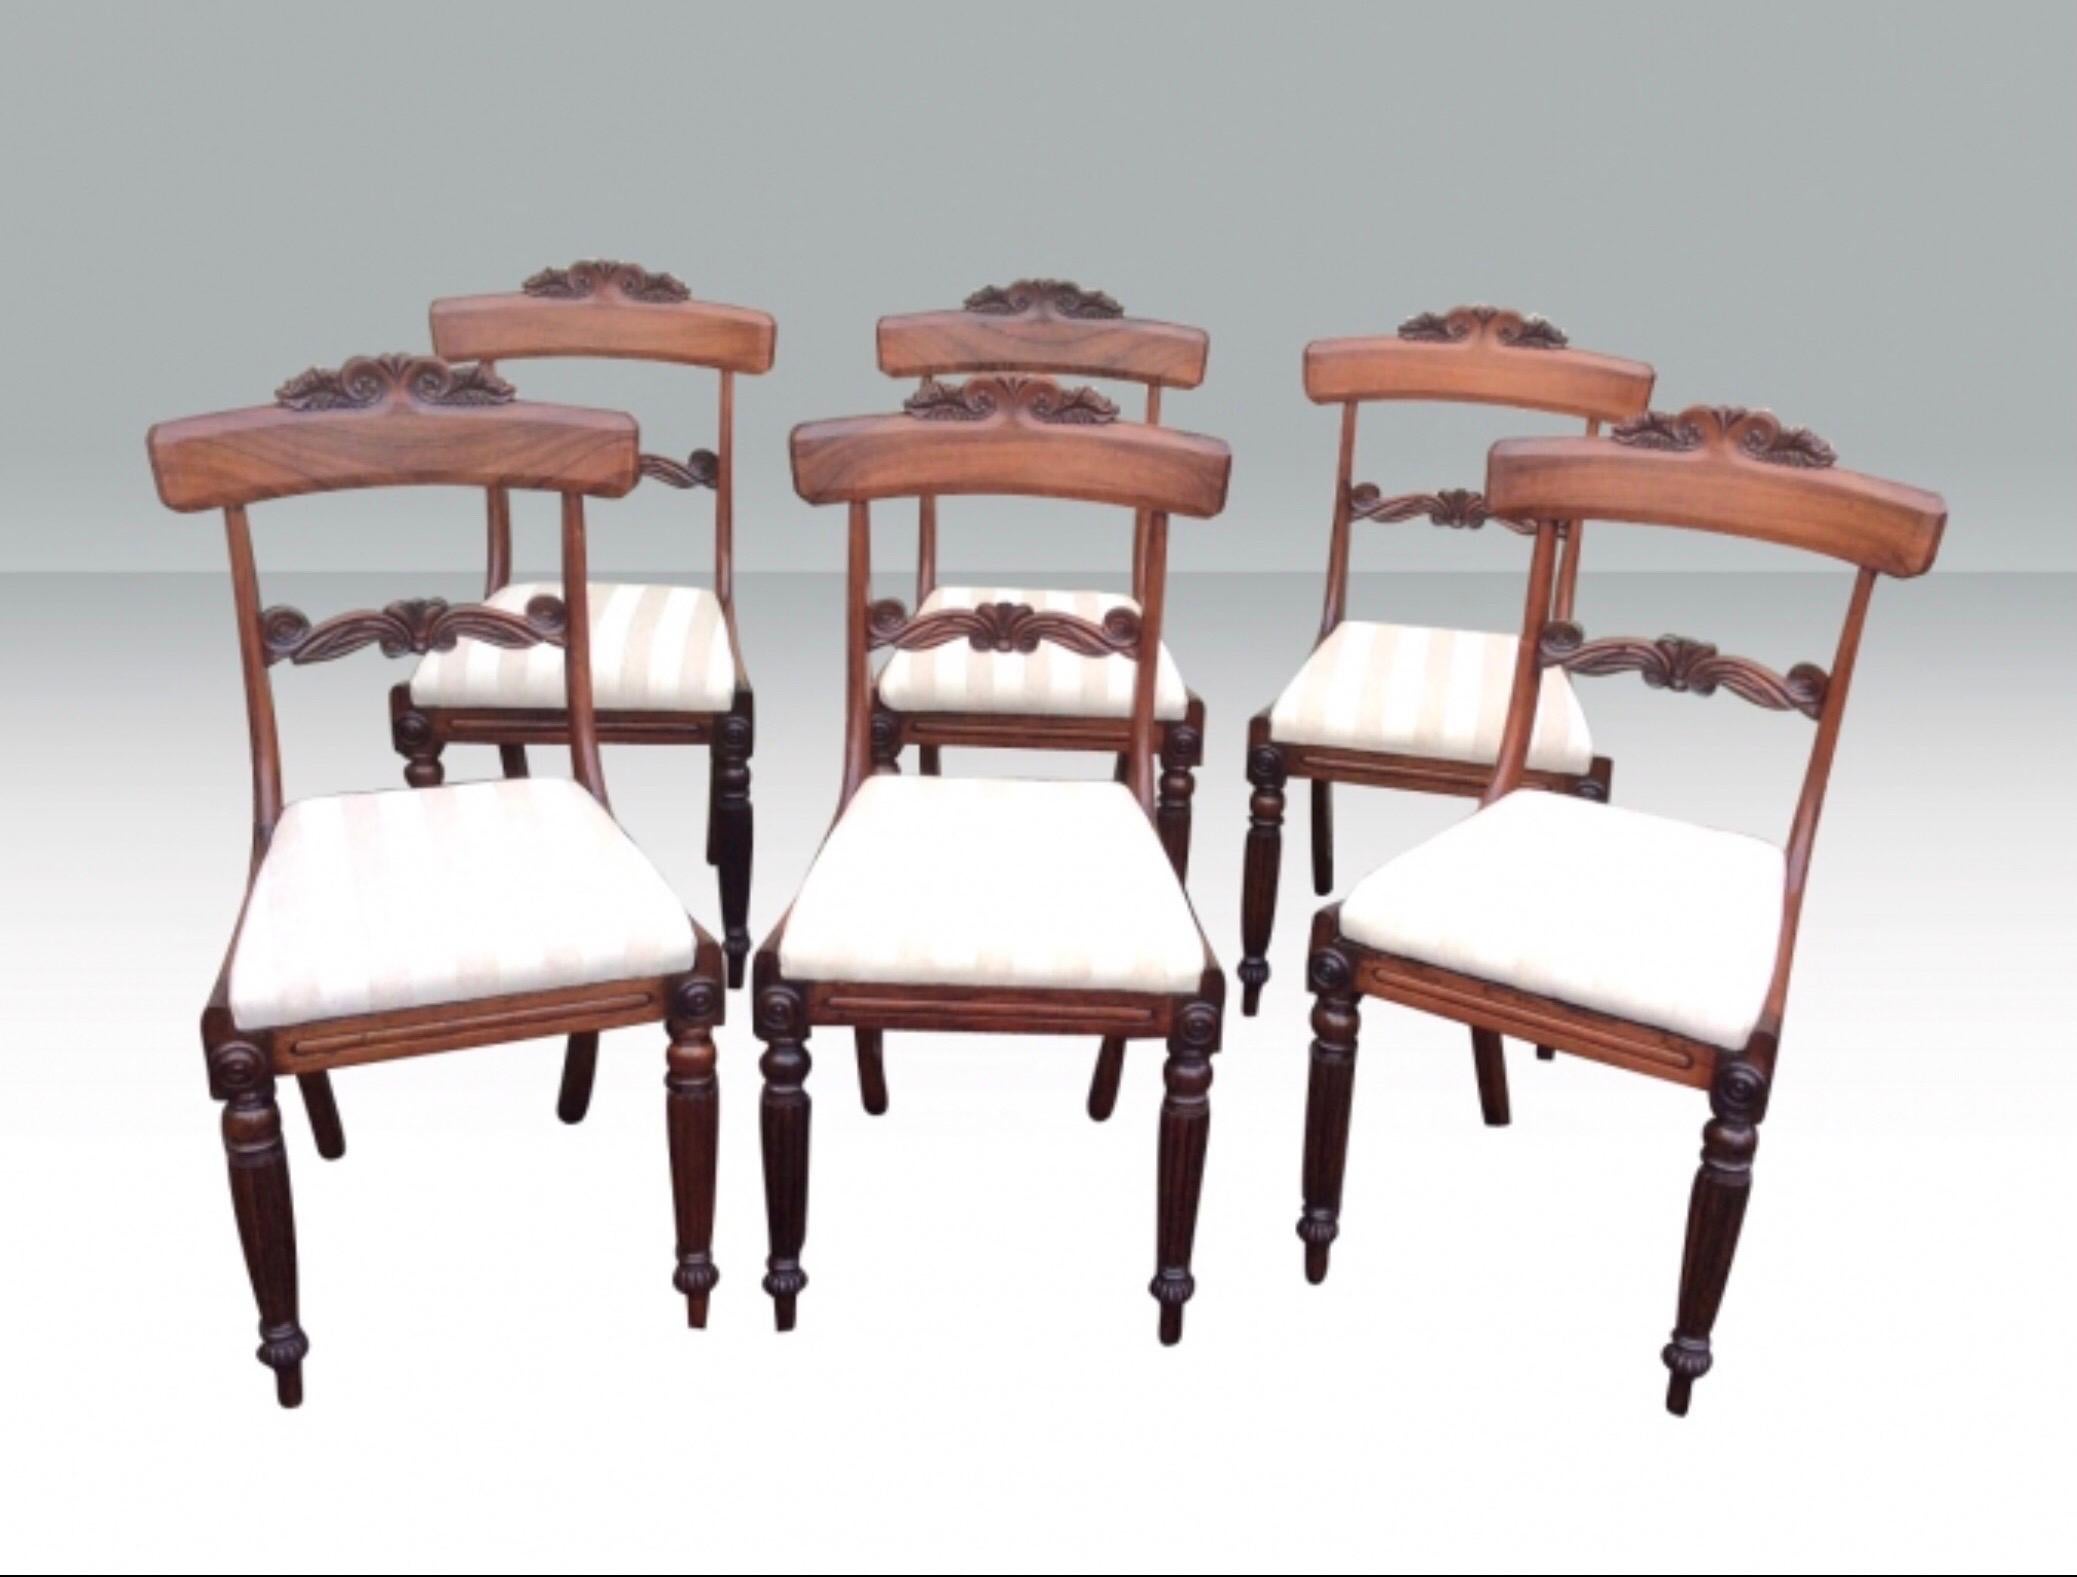 Fabulous Set Of Six Antique
Regency Rosewood Dining Chairs.
Superp Original Condition.
All tight of Joint.
Circa 1820
36ins x 20ins x 18ins wide